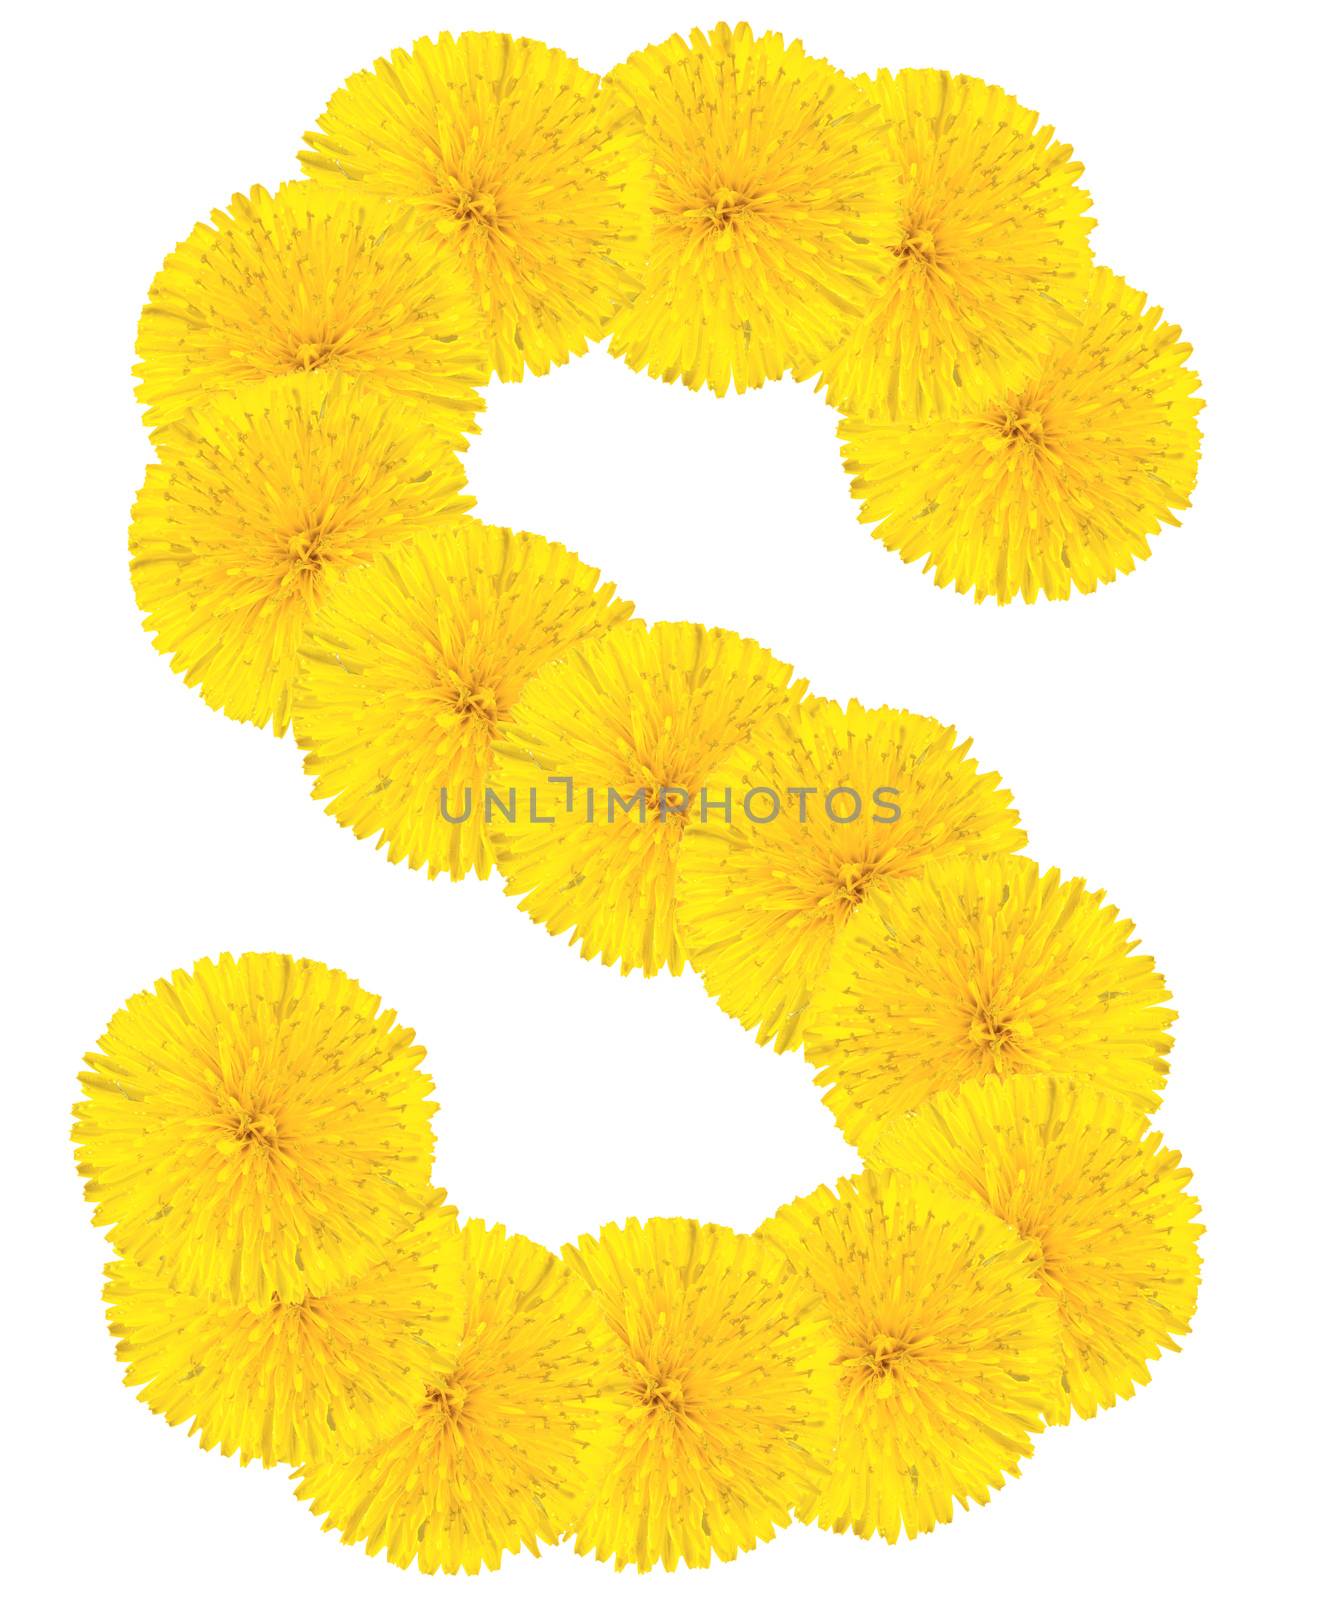 Letter S made from dandelion flowers isolated on white background